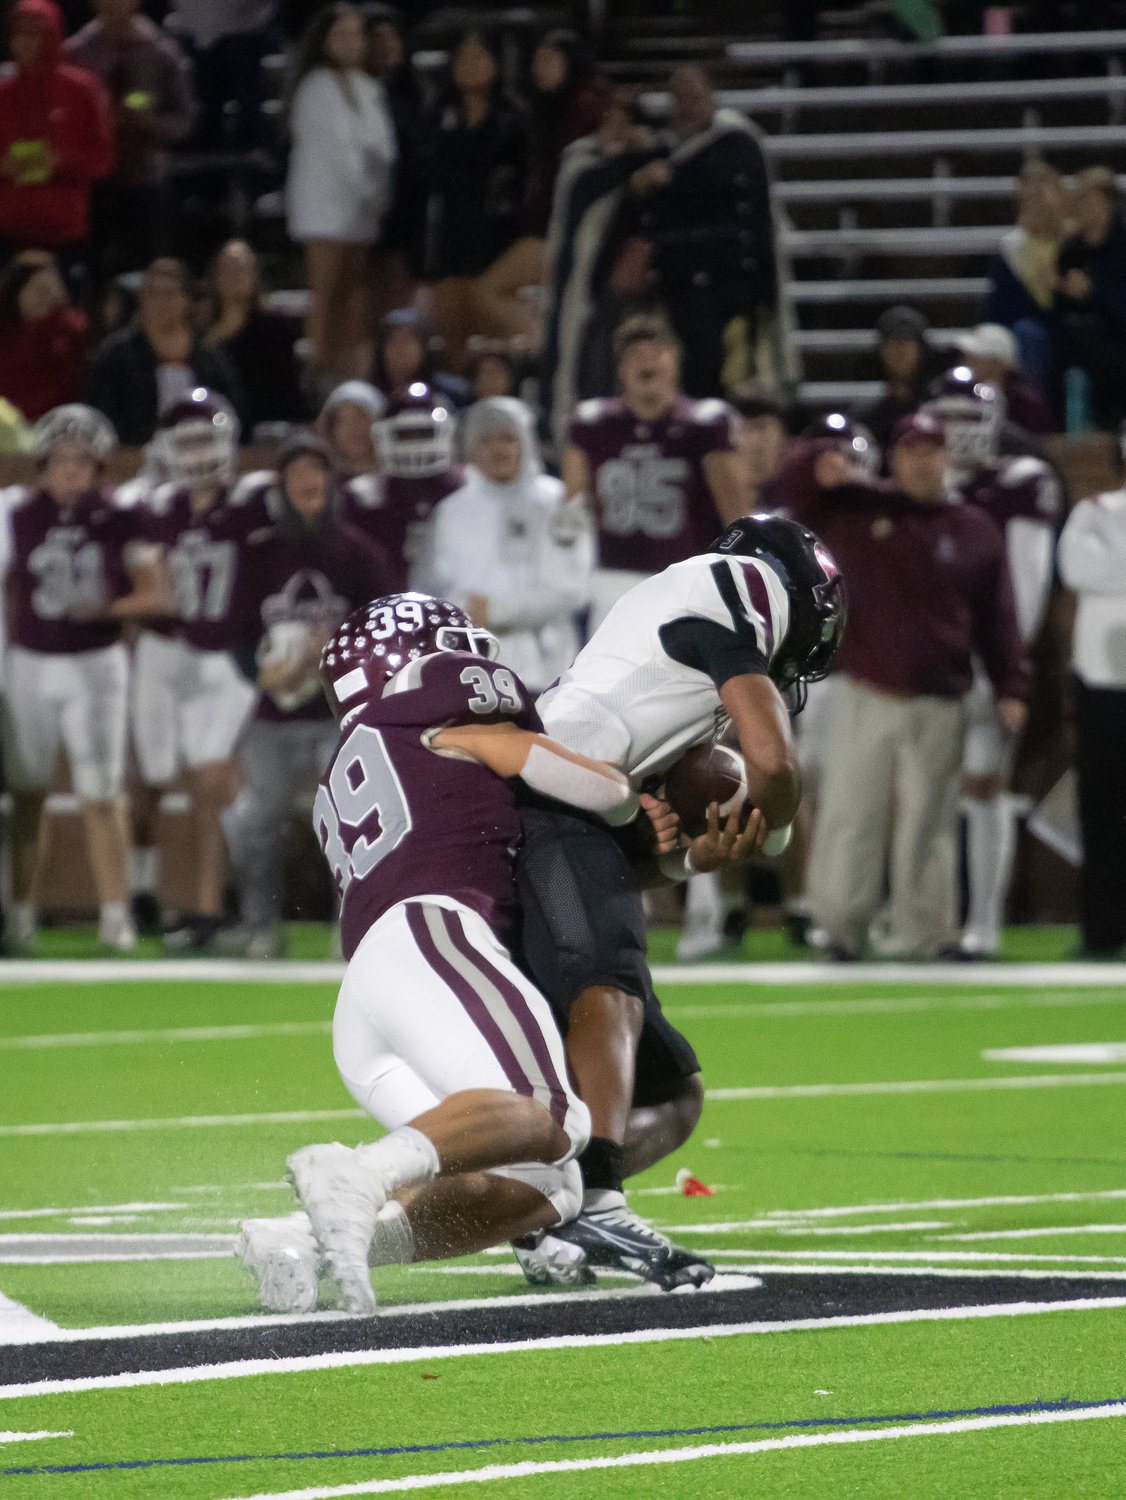 Braden Williams makes a sack during Friday's game between Cinco Ranch and George Ranch at Rhodes Stadium.